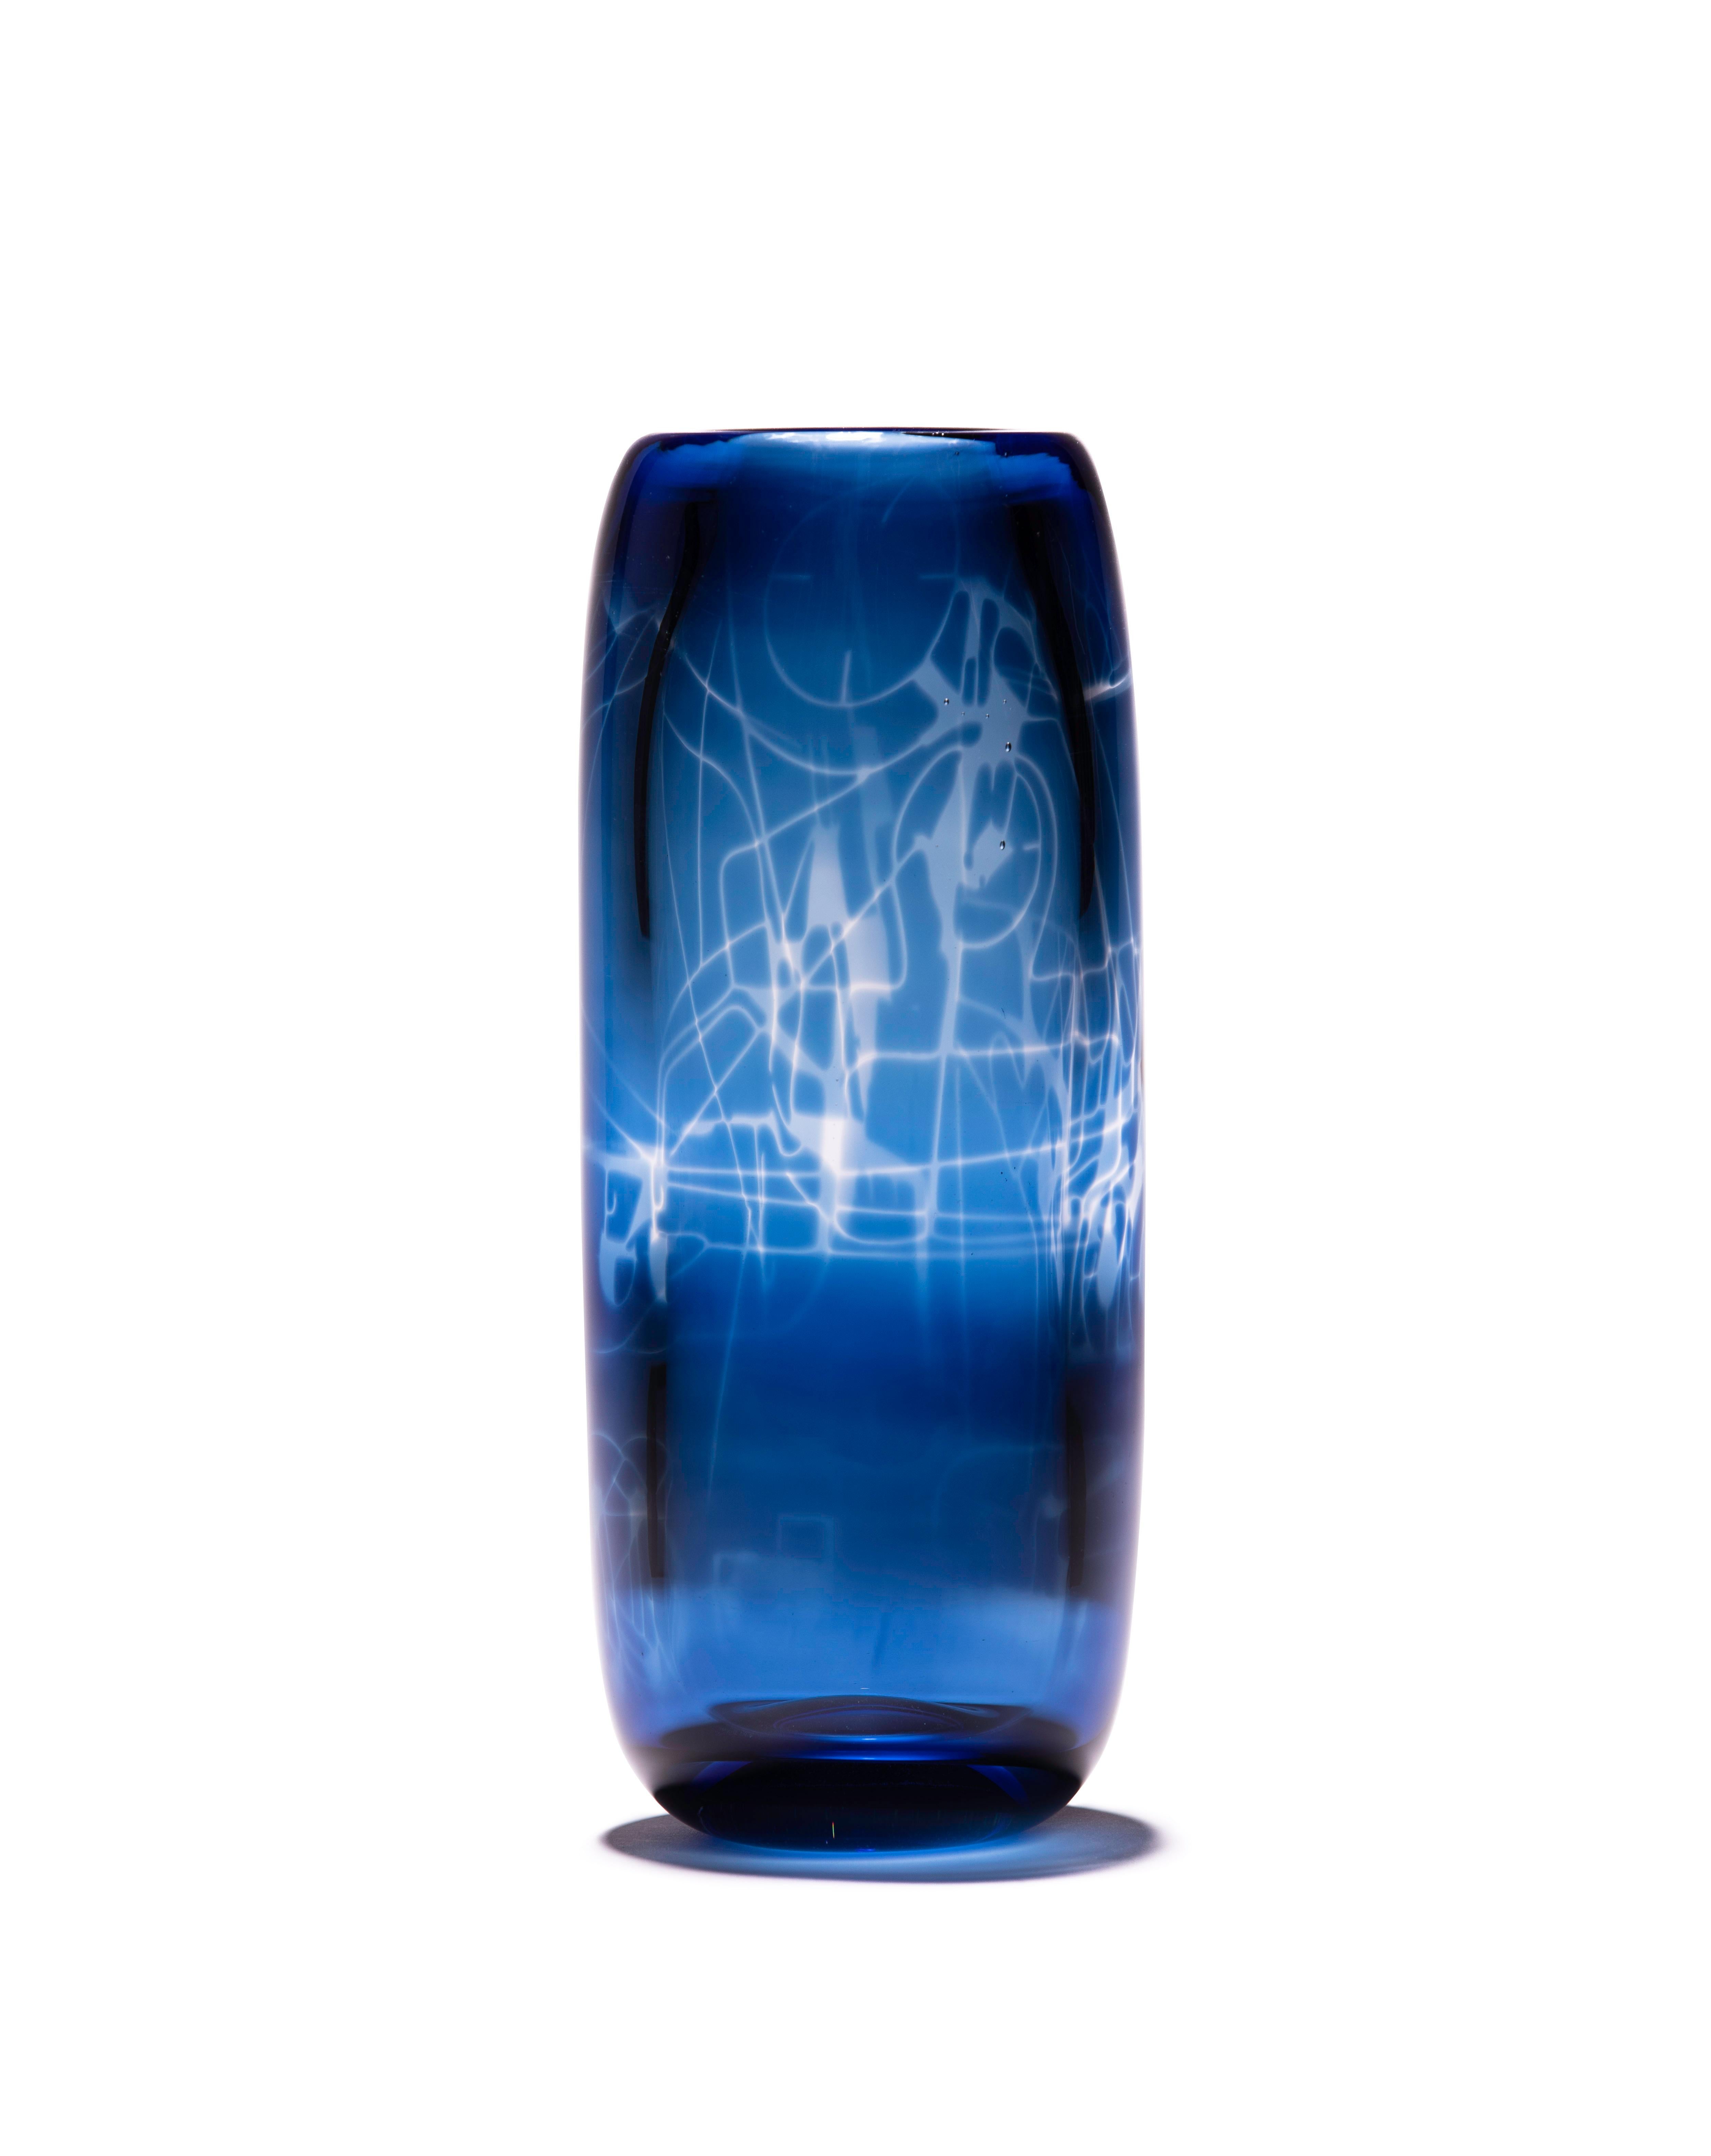 Unique Harvest Graal Blue and Black Glass Vase by Tiina Sarapu For Sale 8